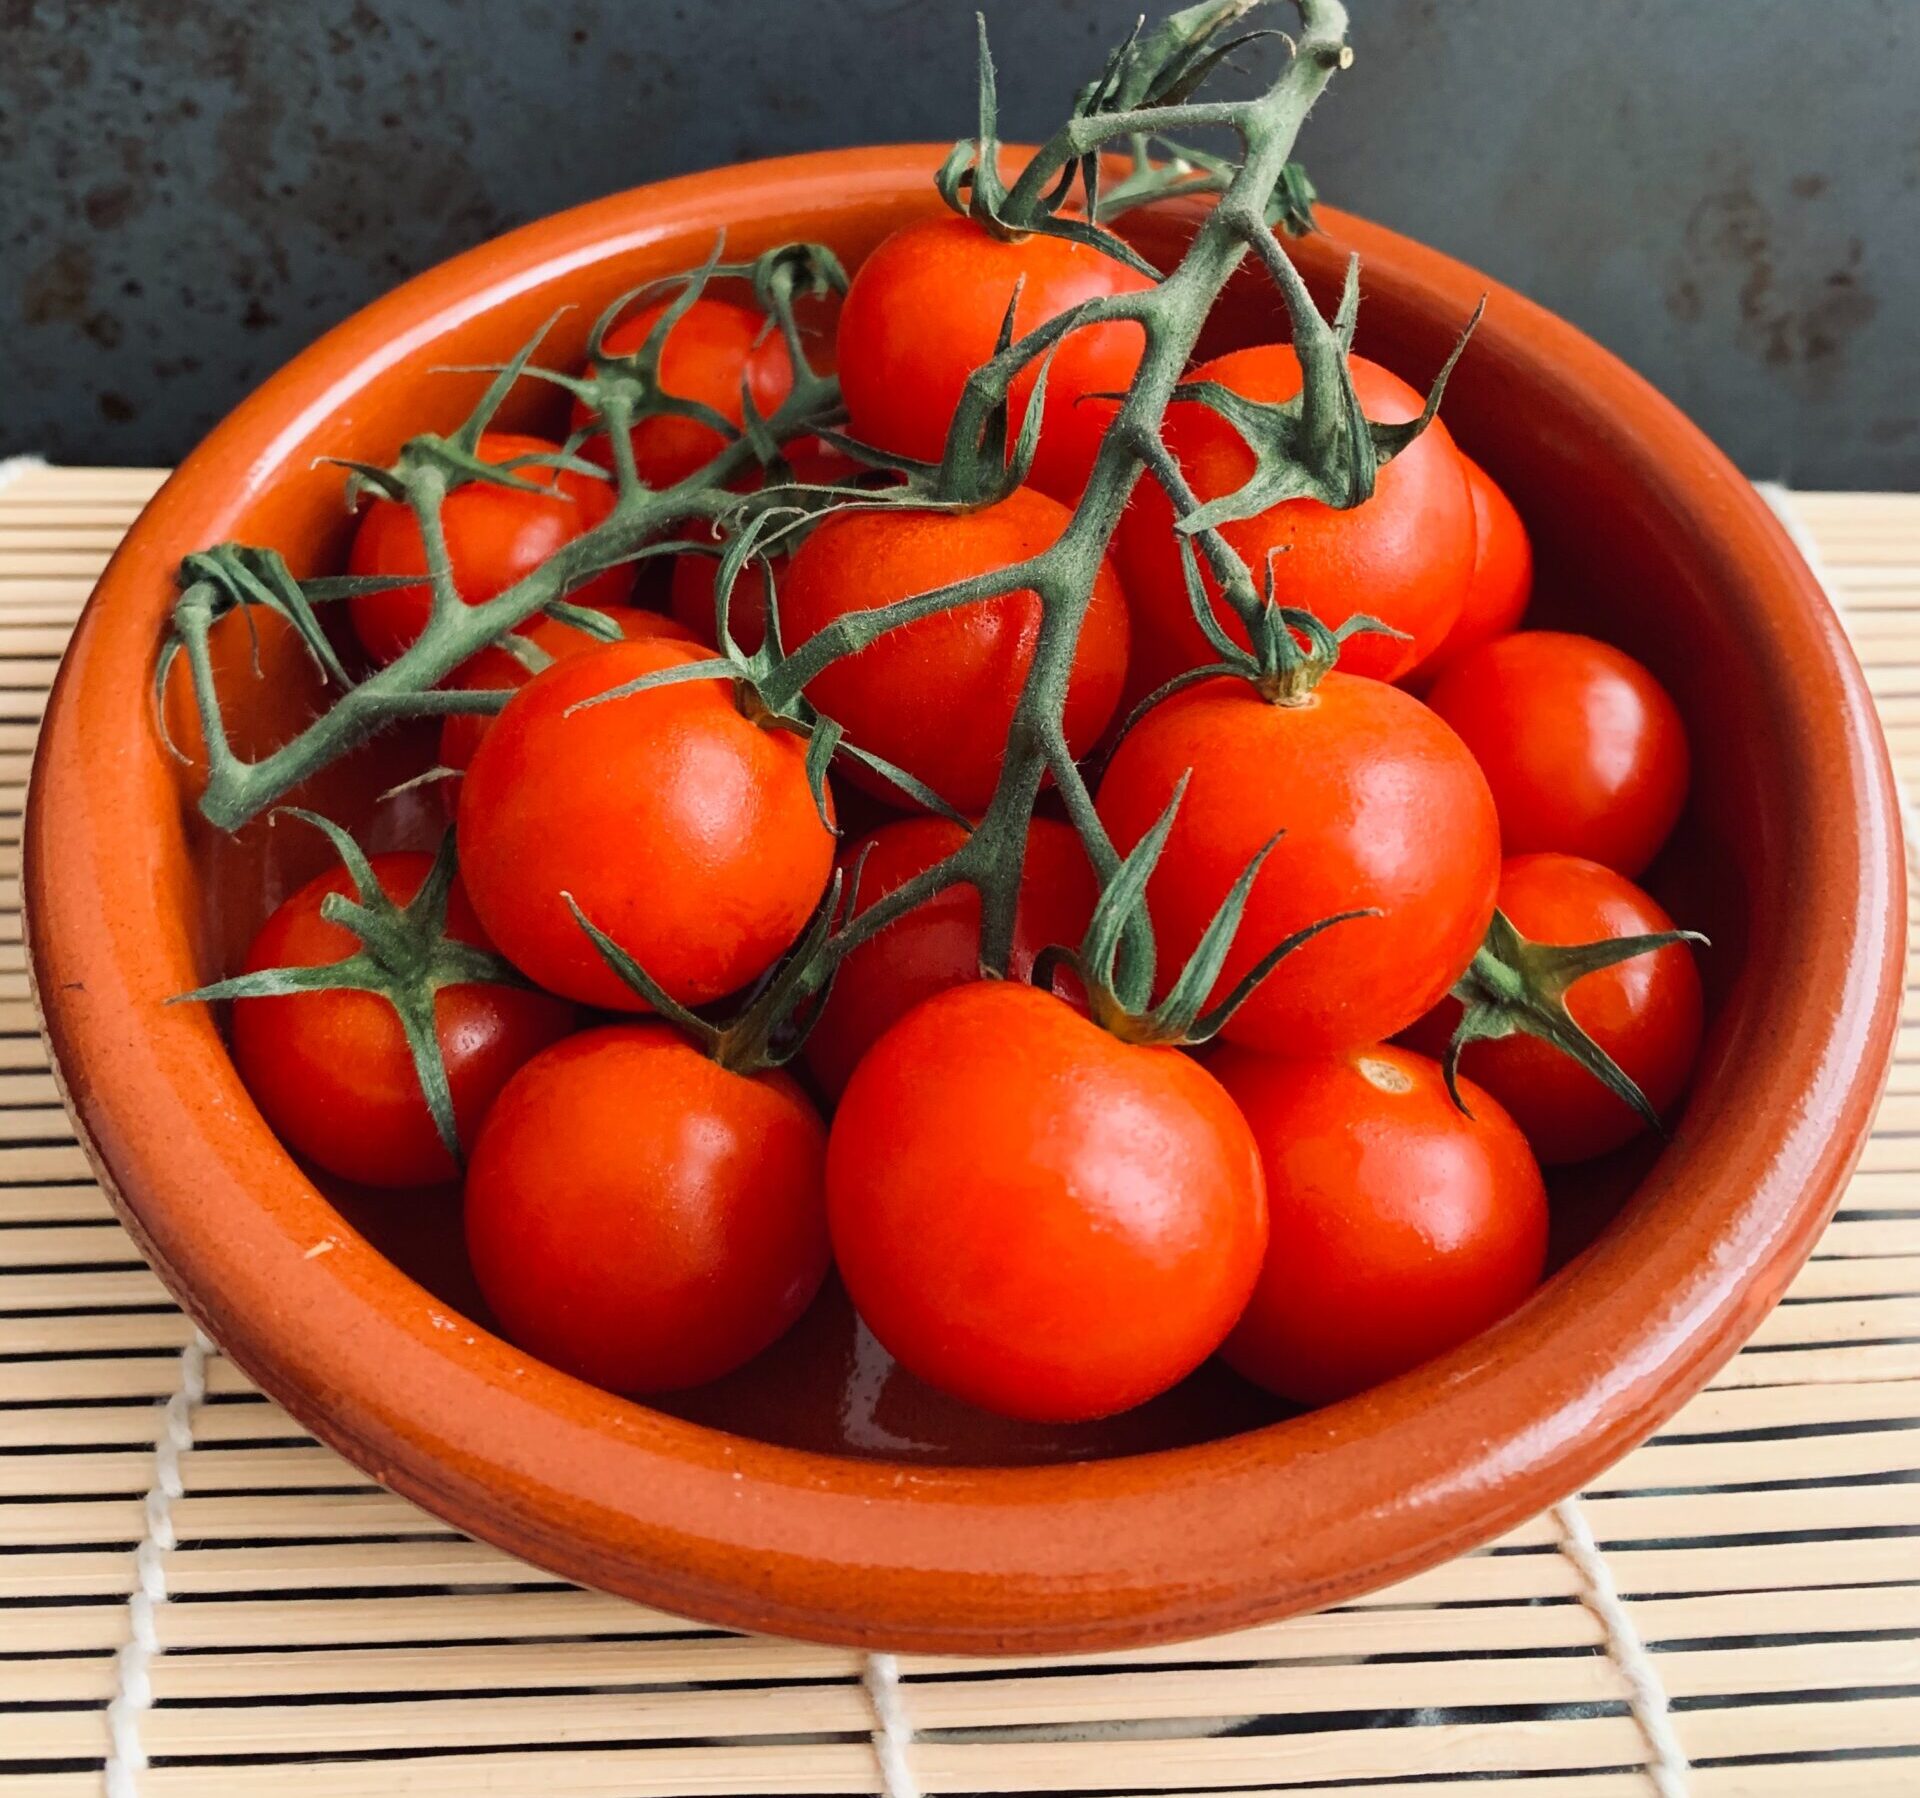 Raw or cooked? The best way to eat tomatoes